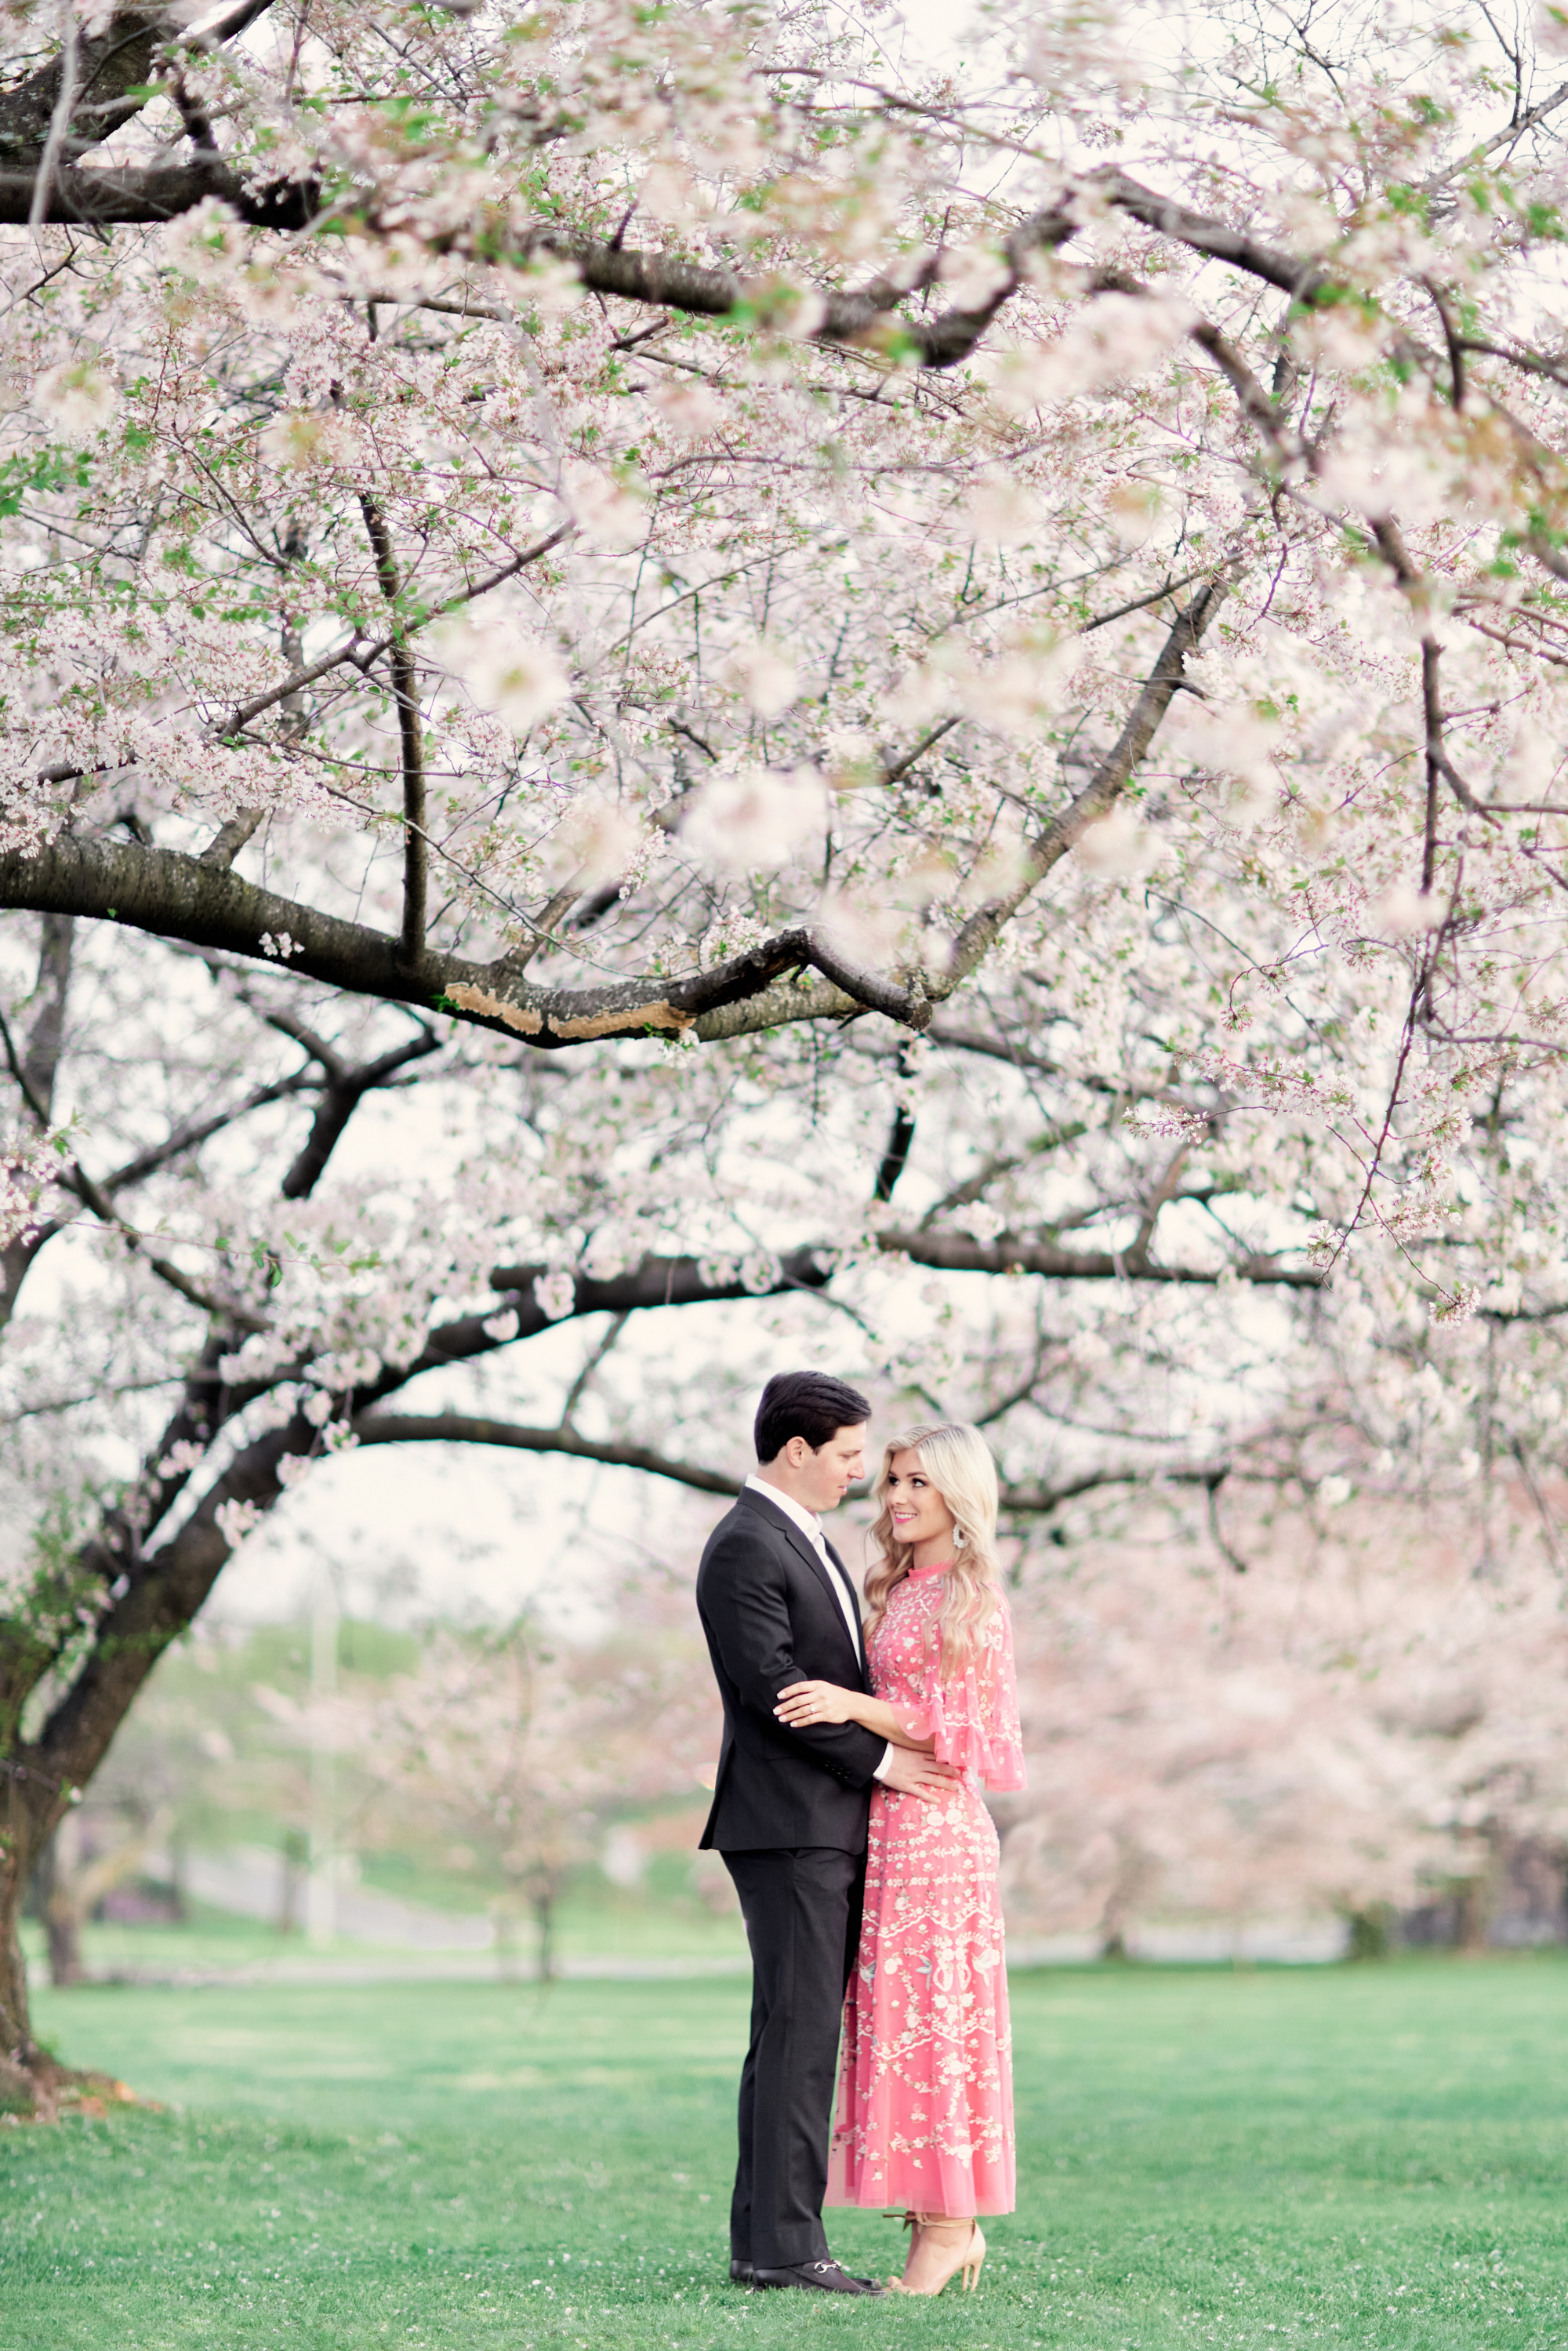 Cherryblossoms Dating